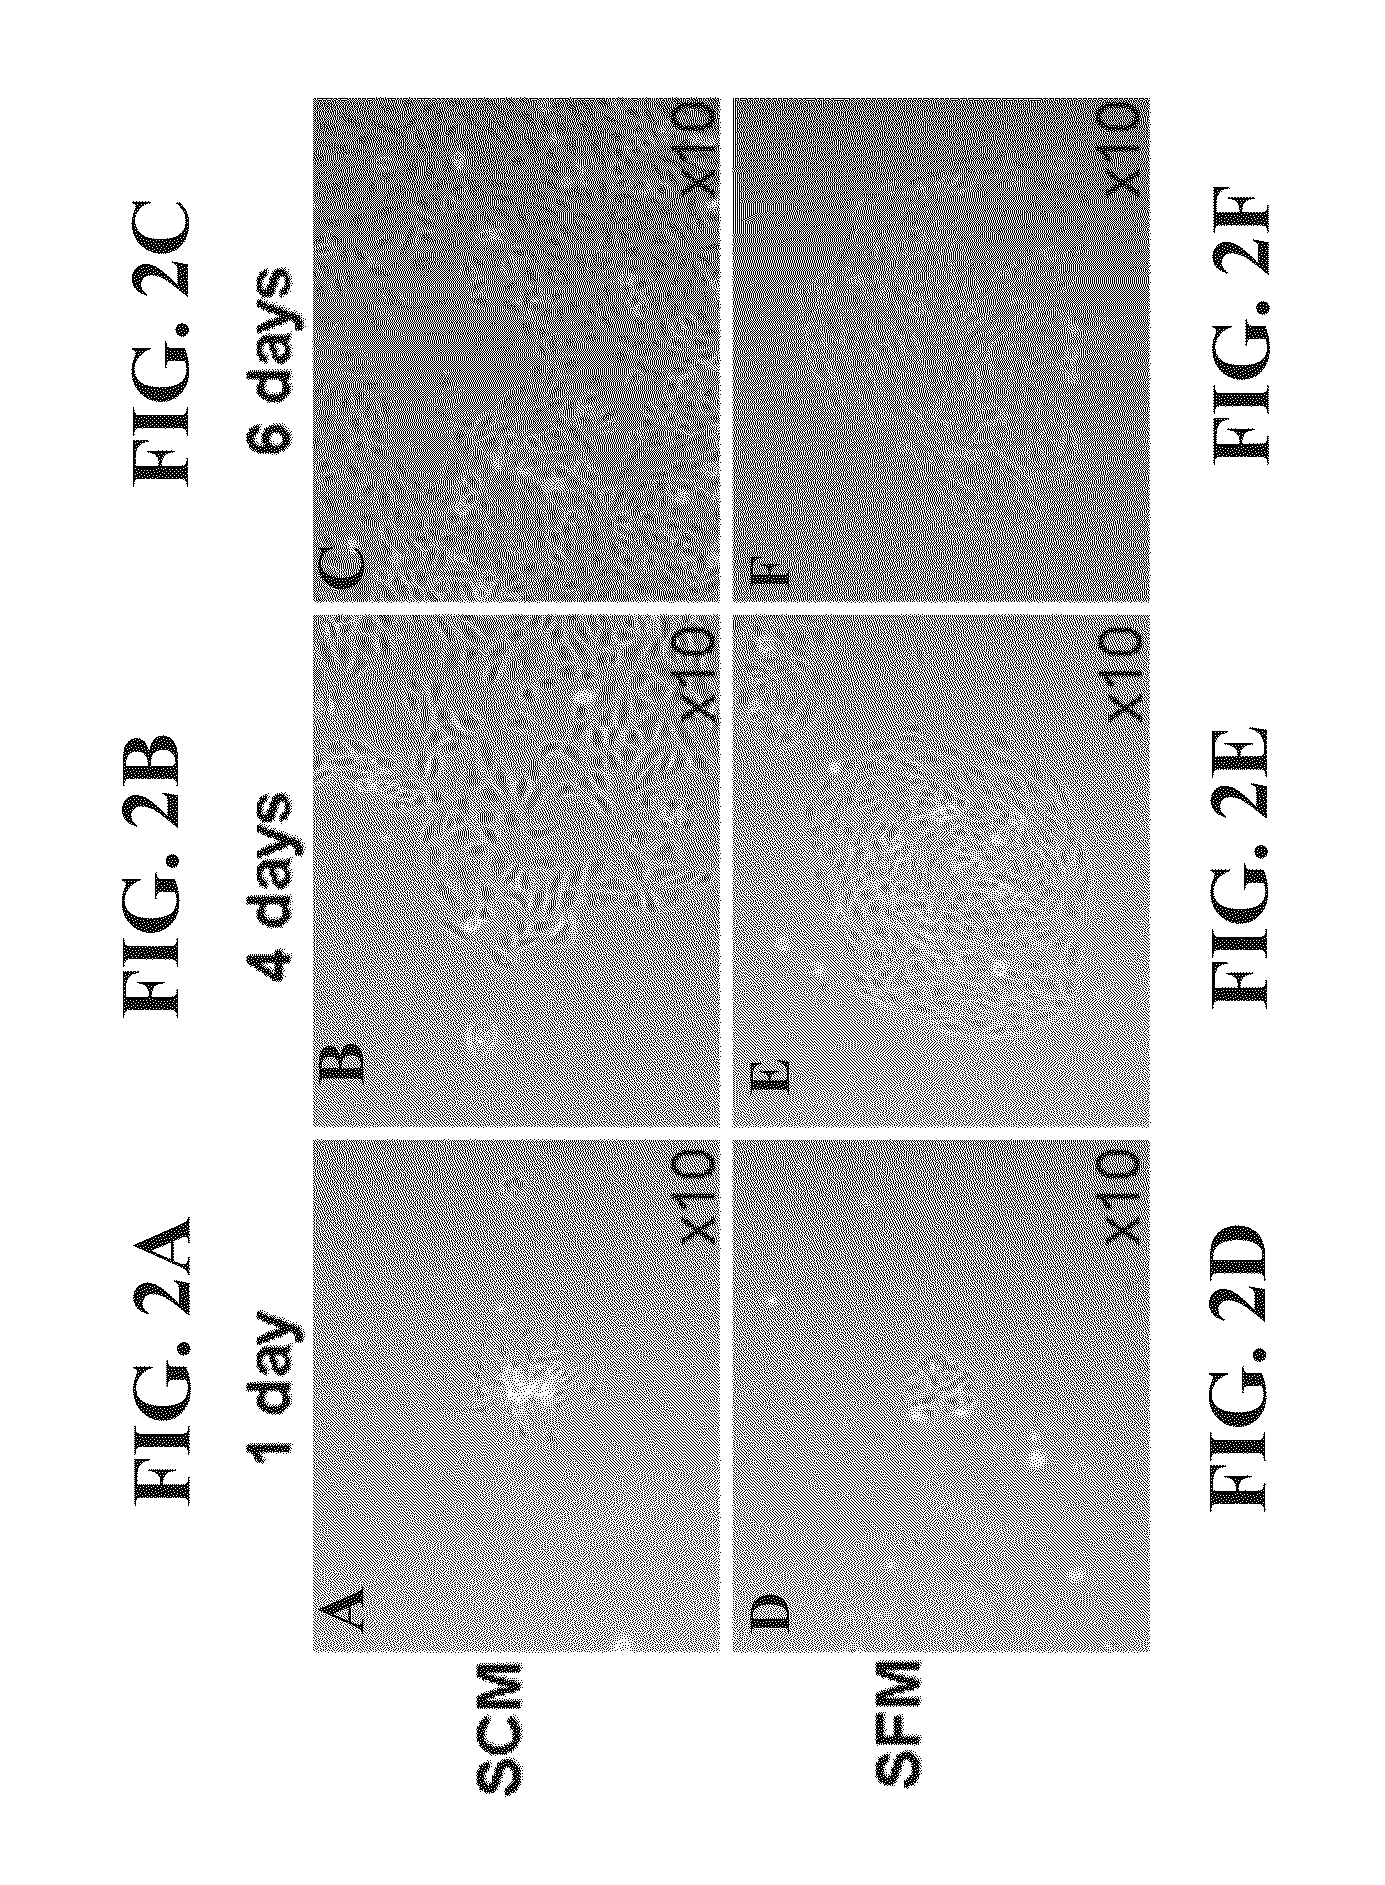 Isolated populations of adult renal cells and methods of isolating and using same